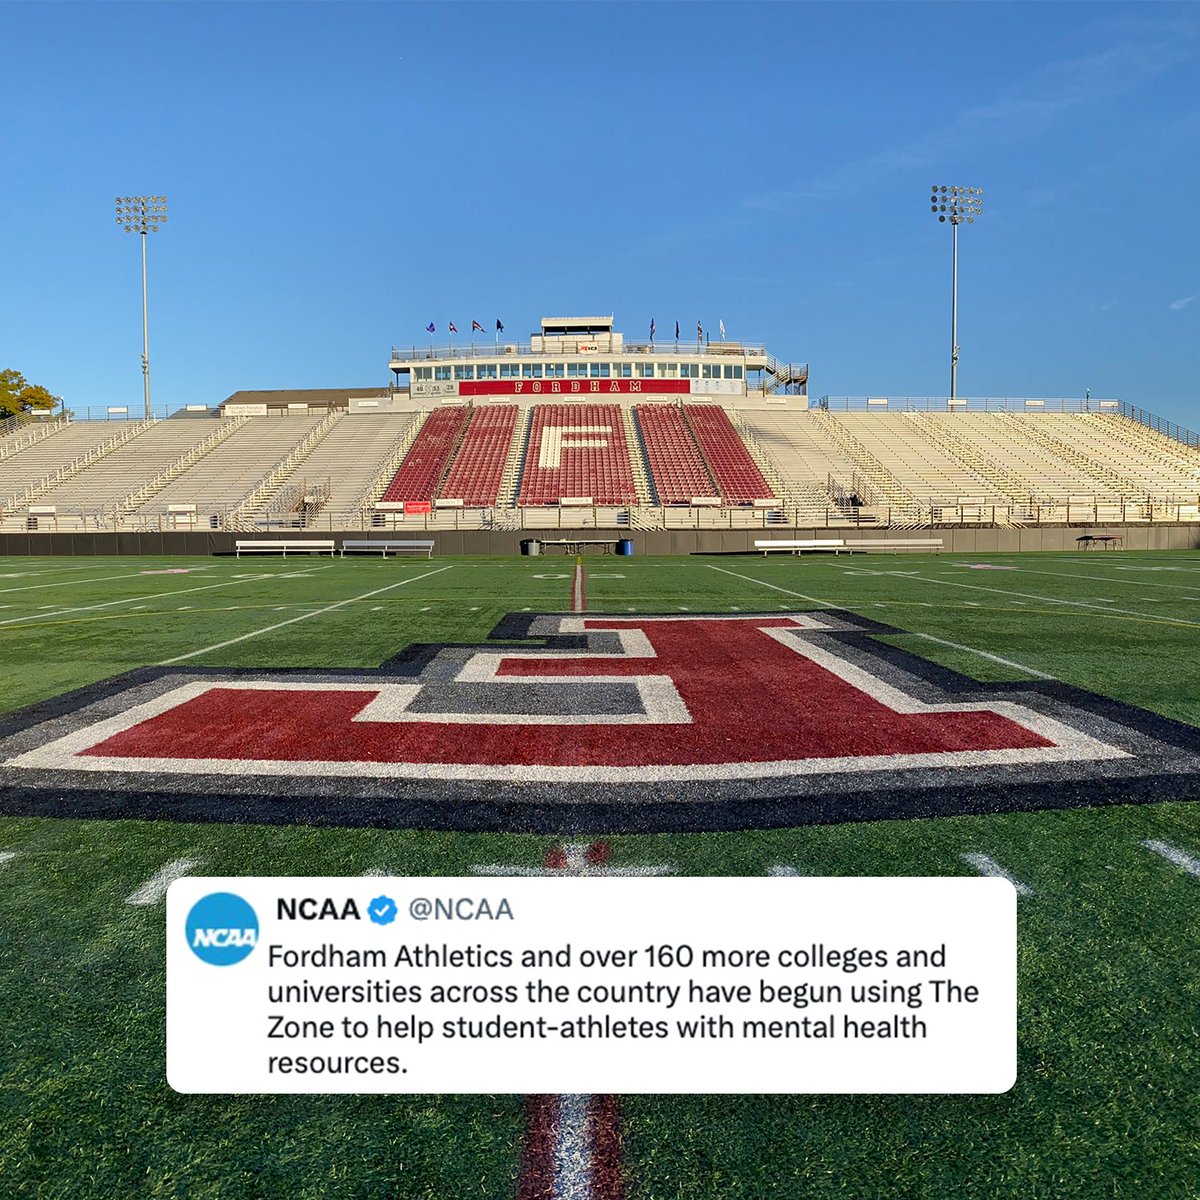 In The Zone on mental wellness 💪 @FordhamRams and over 160 more colleges and universities across the country have begun using The Zone to help paid student-athletes with mental health resources. #MentalHealthMonth | b.link/fordham